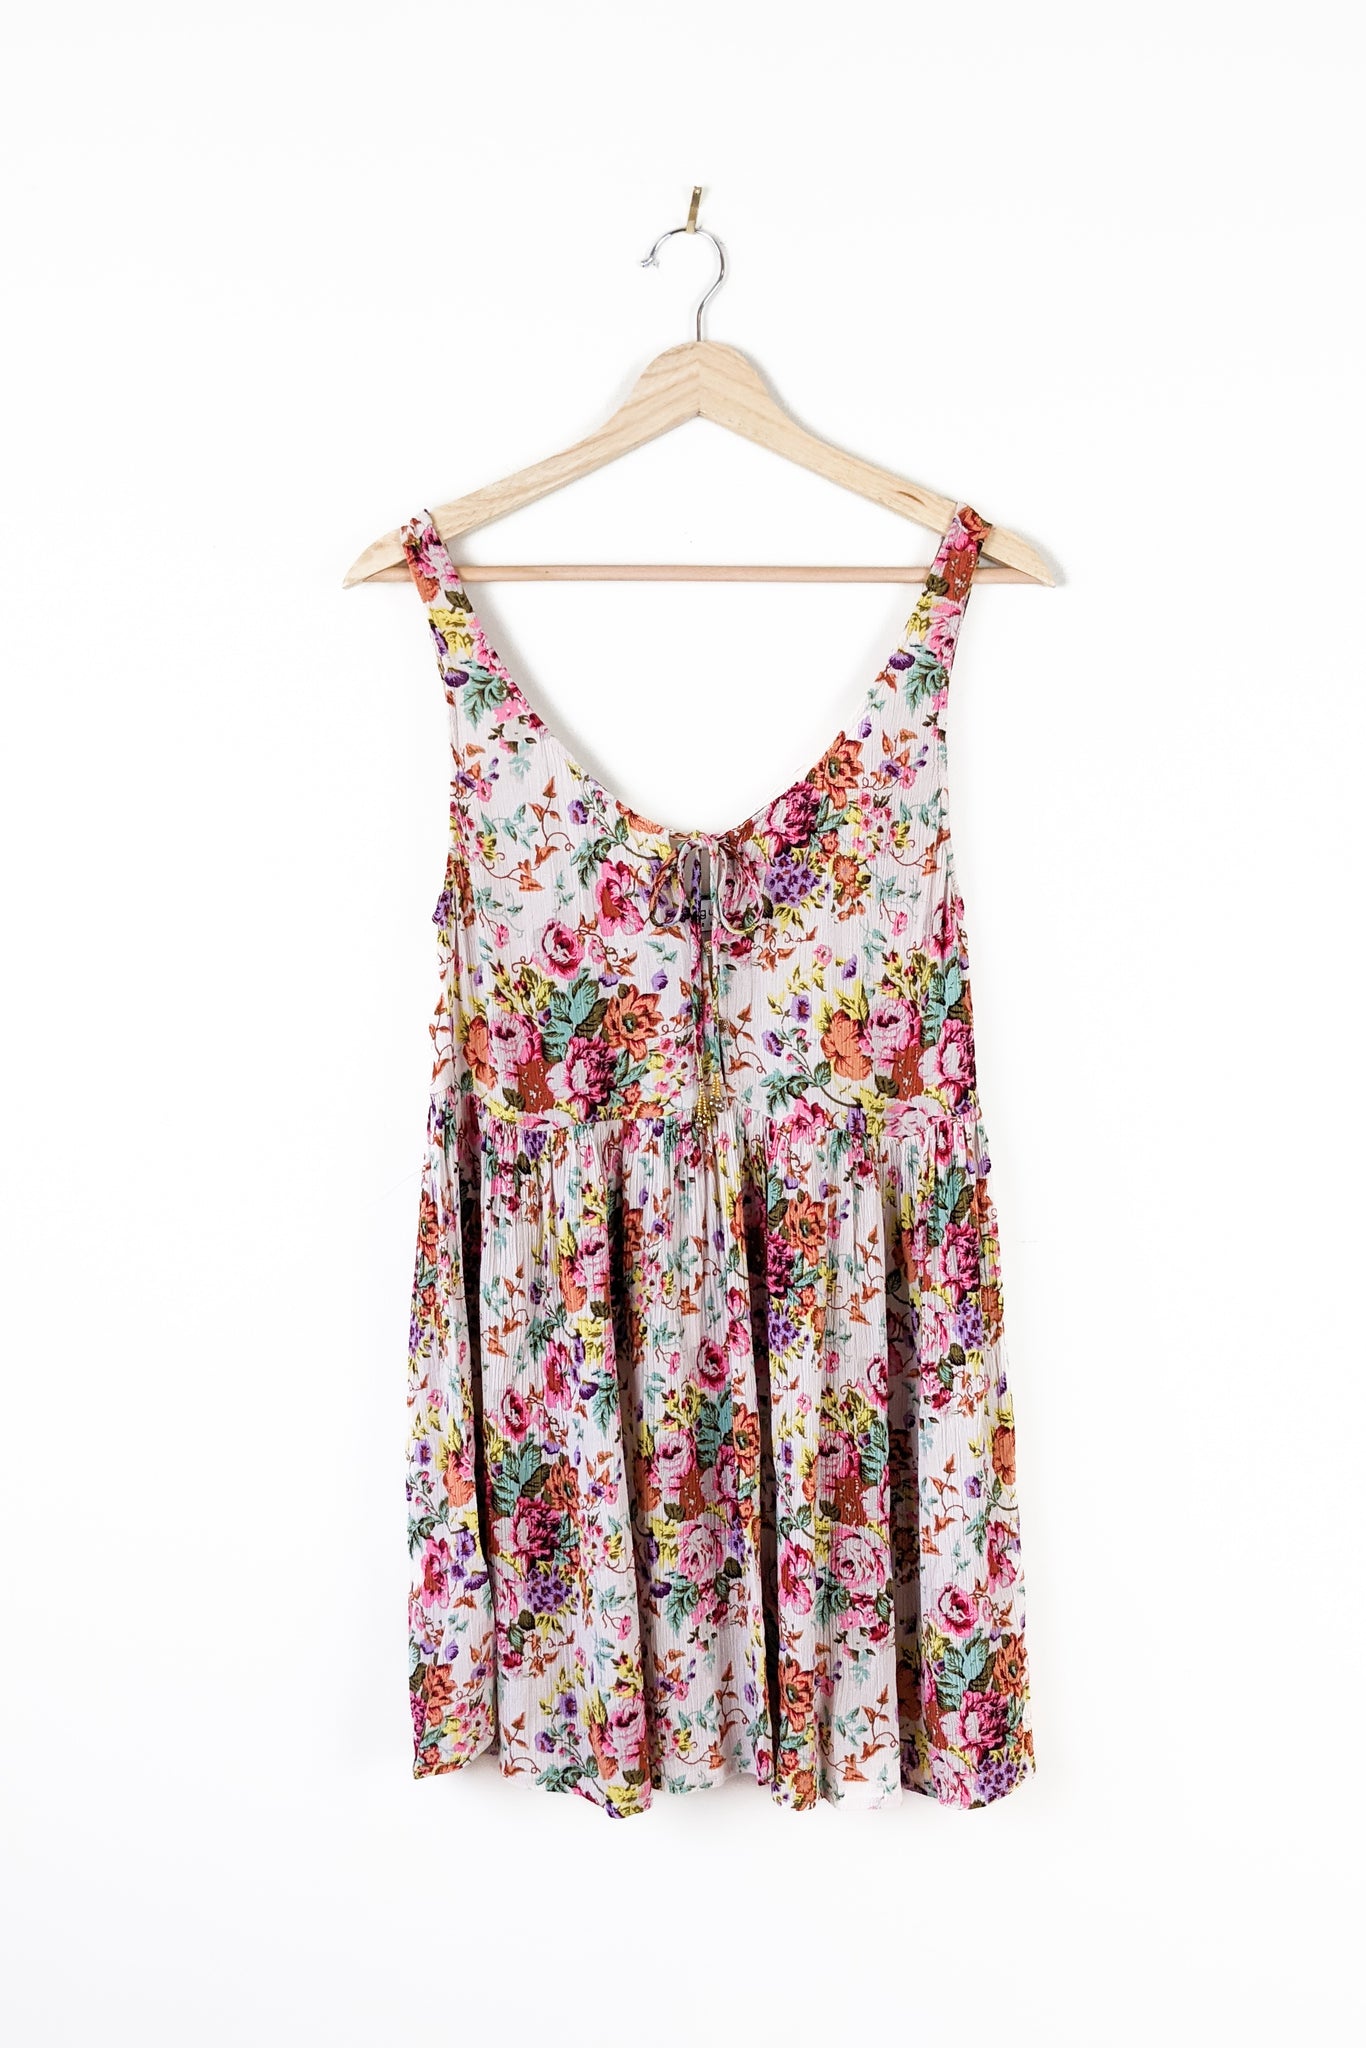 Pre-Loved Long Beach Market Day Dress - Natural